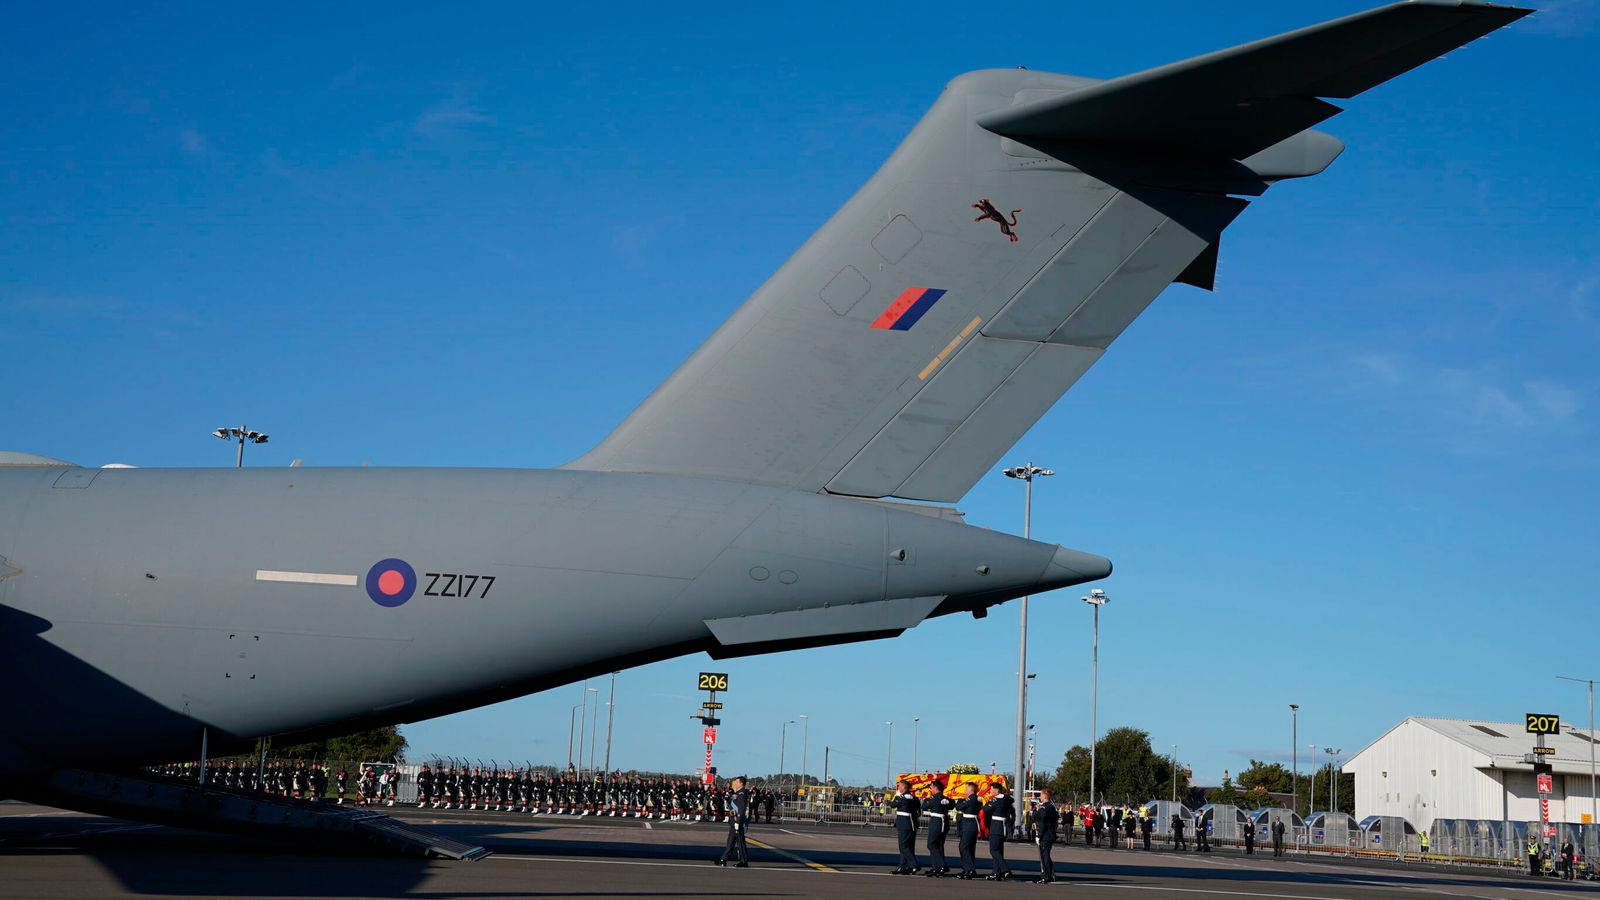 Queen approved RAF repatriation jet for her coffin, saying: 'If it's good enough for my boys, it's good enough for me' - according to Mike Tindall